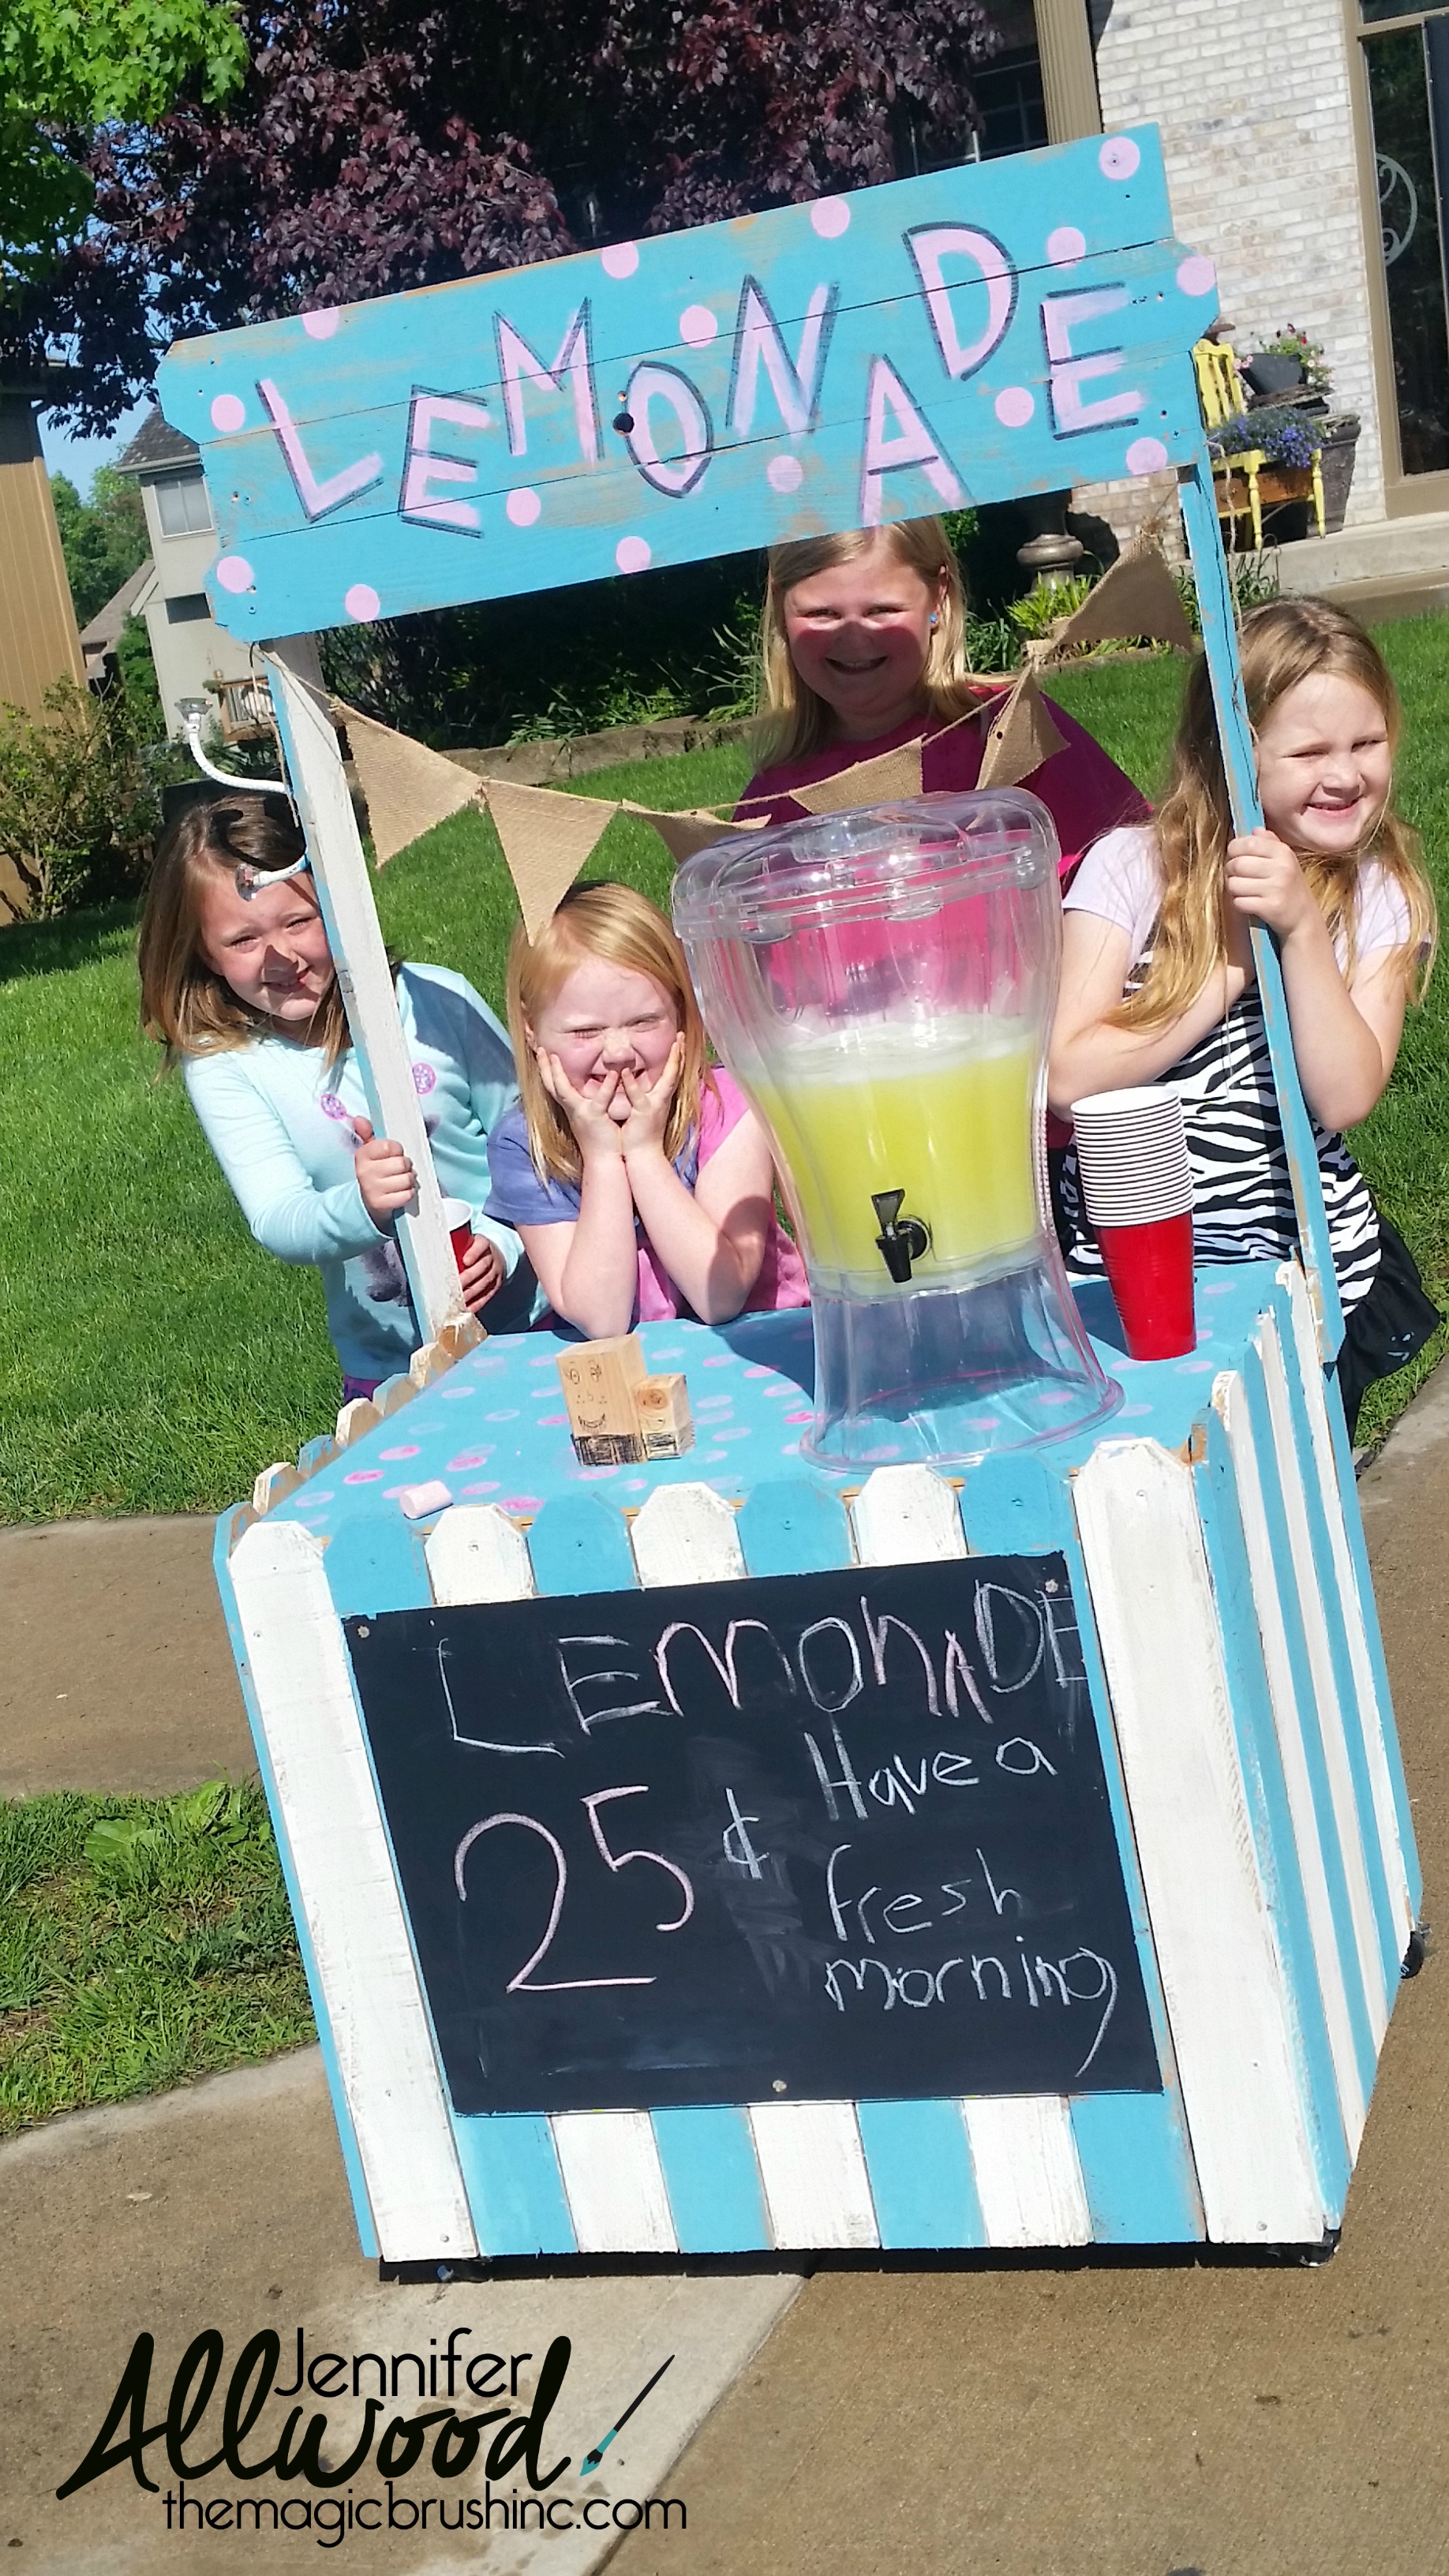 Perhaps the cutest lemonade stand ever (but I may be a little biased)